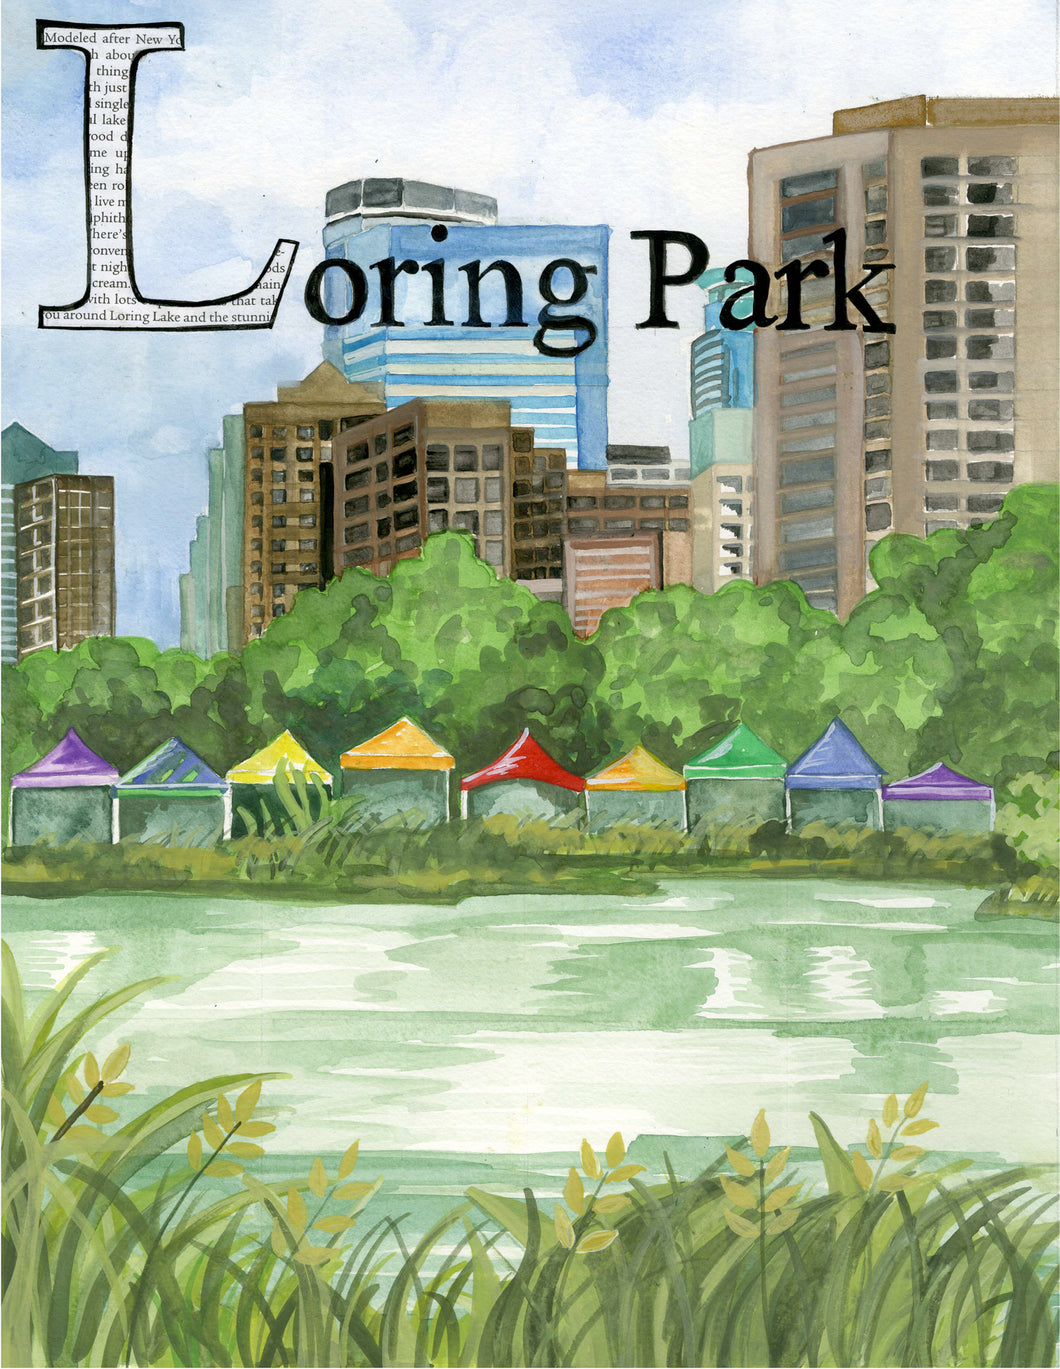 L is for Loring Park